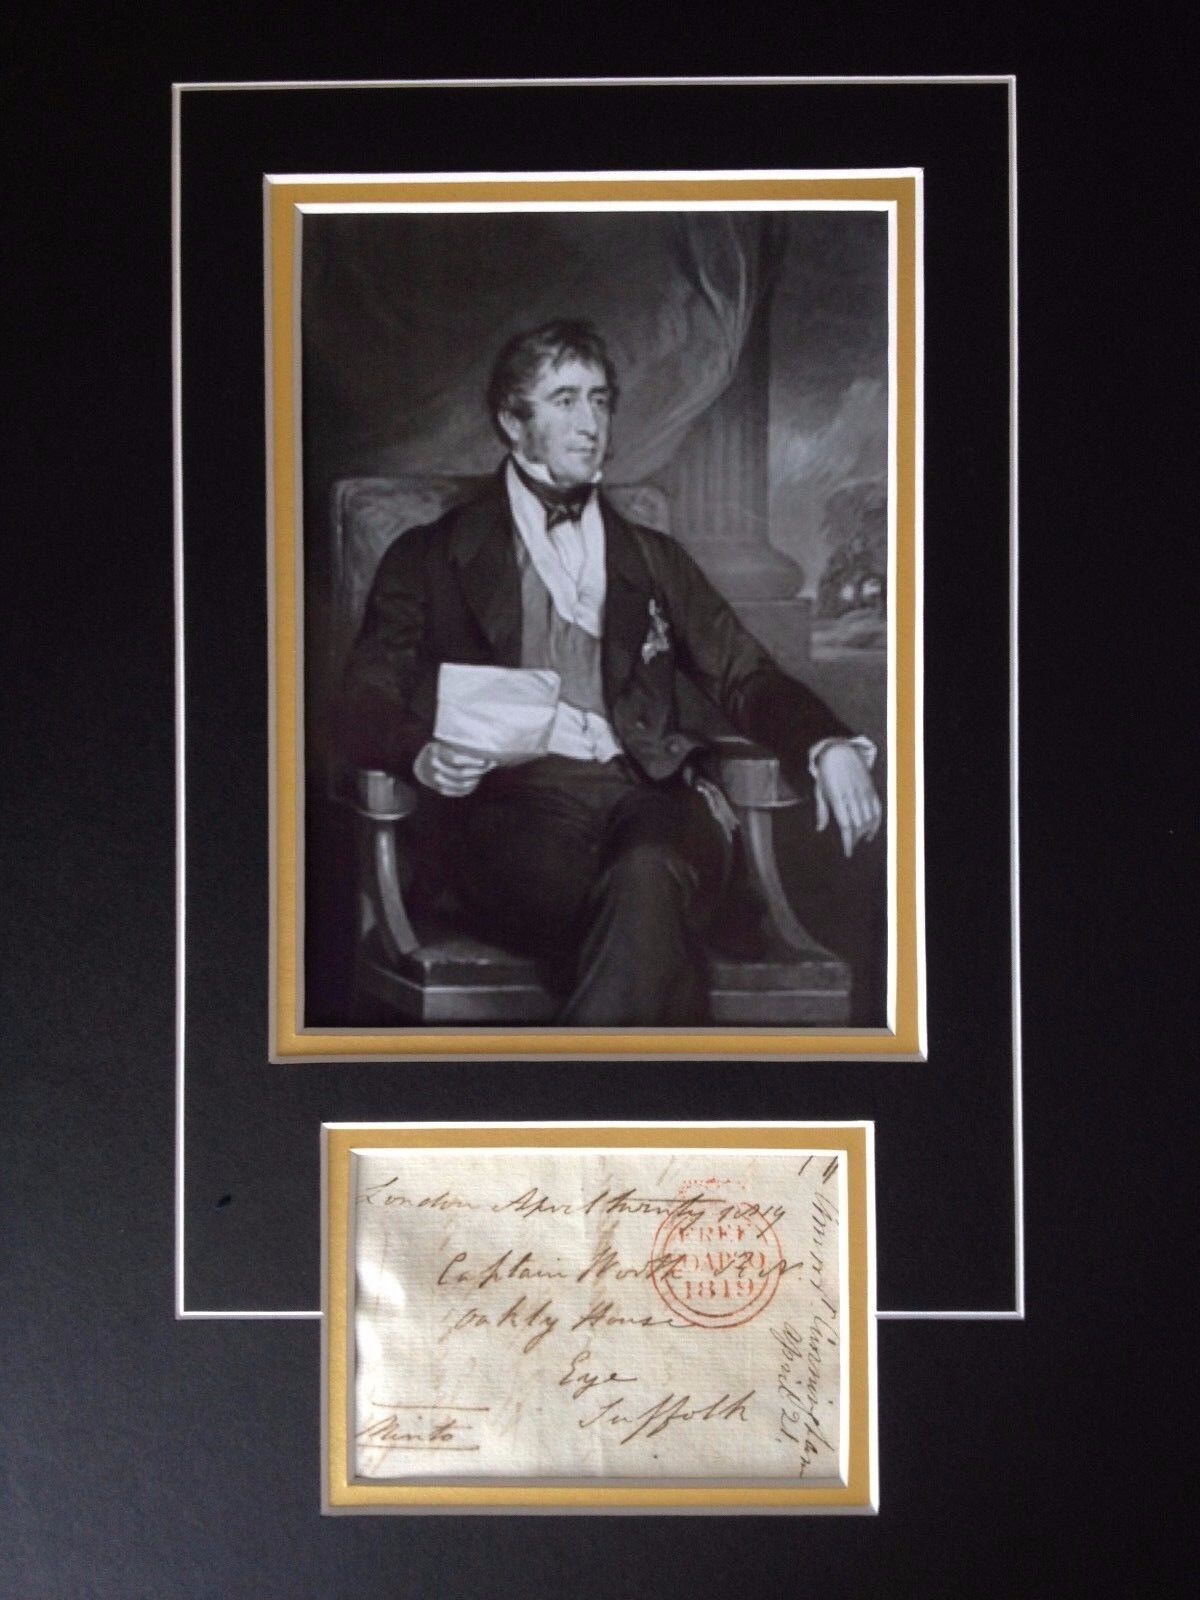 2nd EARL MINTO - LORD OF THE ADMIRALTY - SIGNED B/W Photo Poster painting DISPLAY